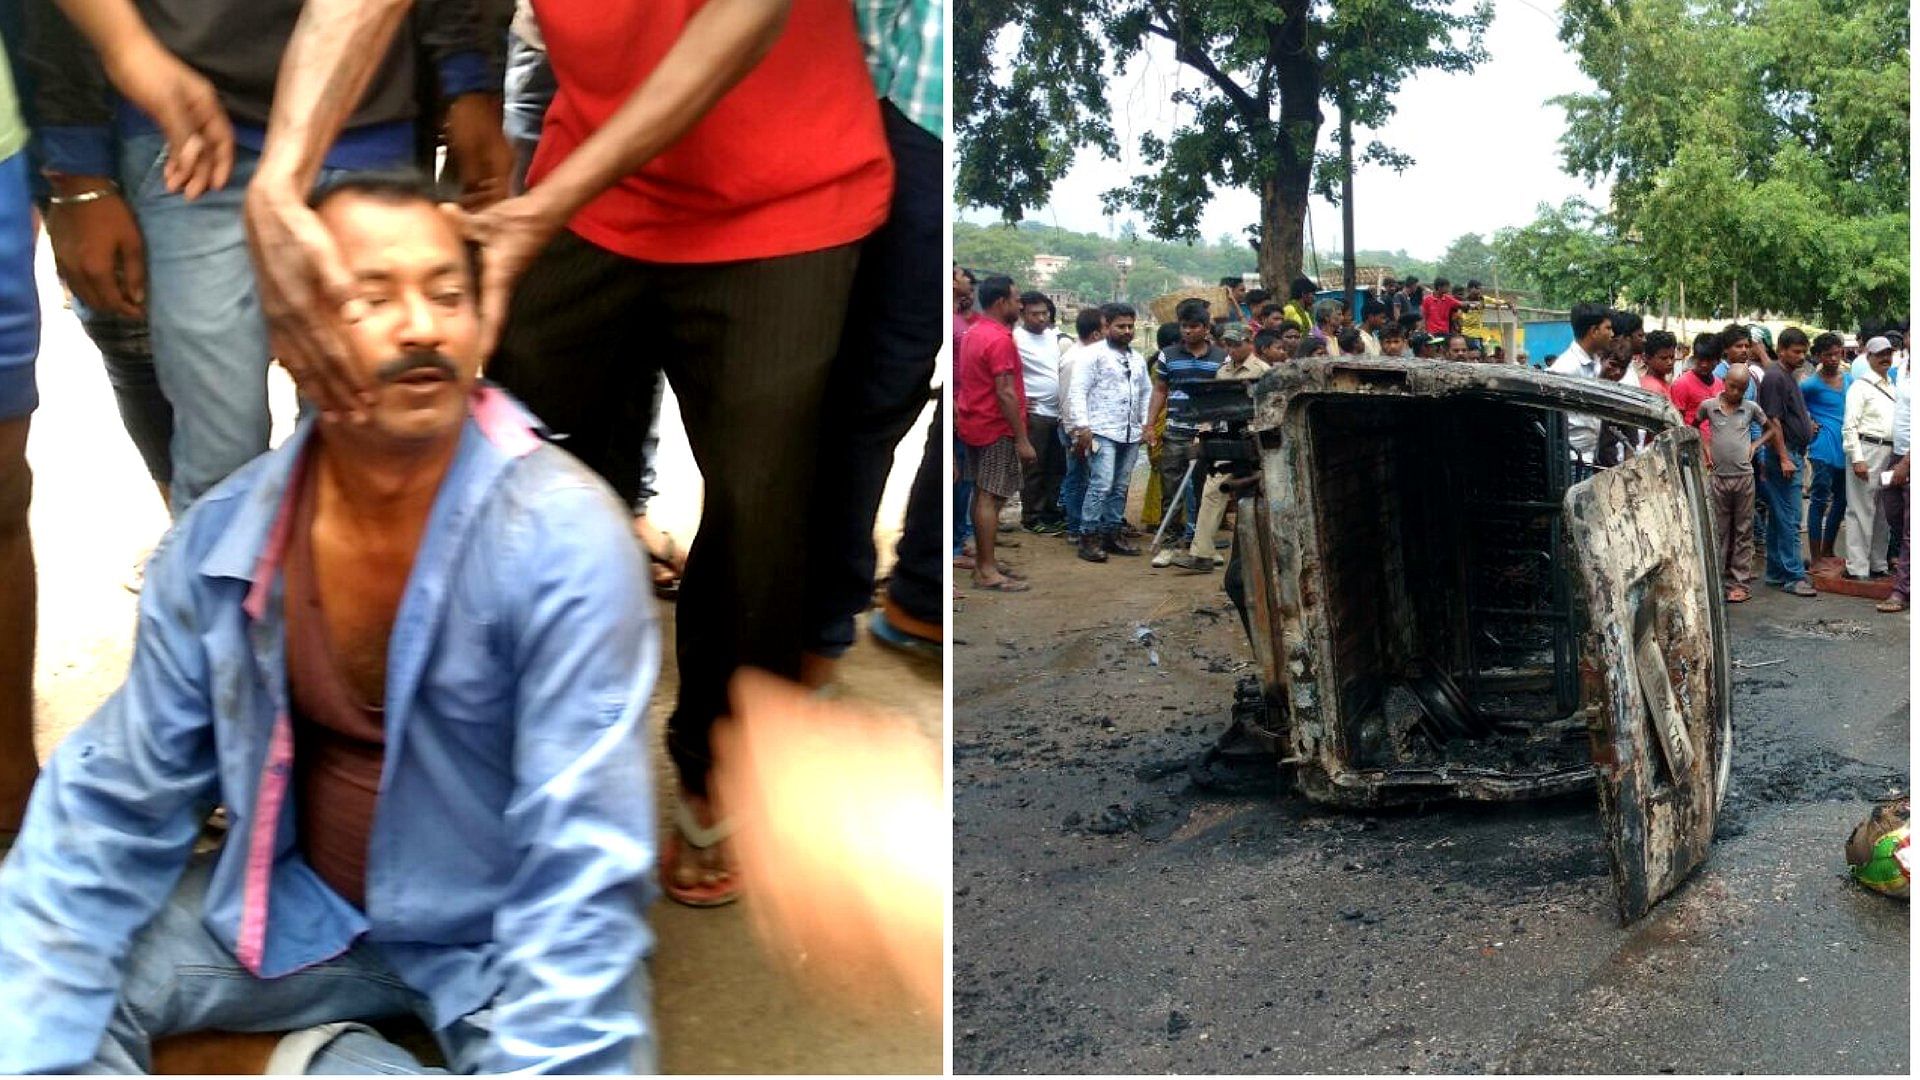 

Alimuddin Ansari was made to pose for photos while he was being beaten. On the right is the Maruti van that was burnt on Thursday.